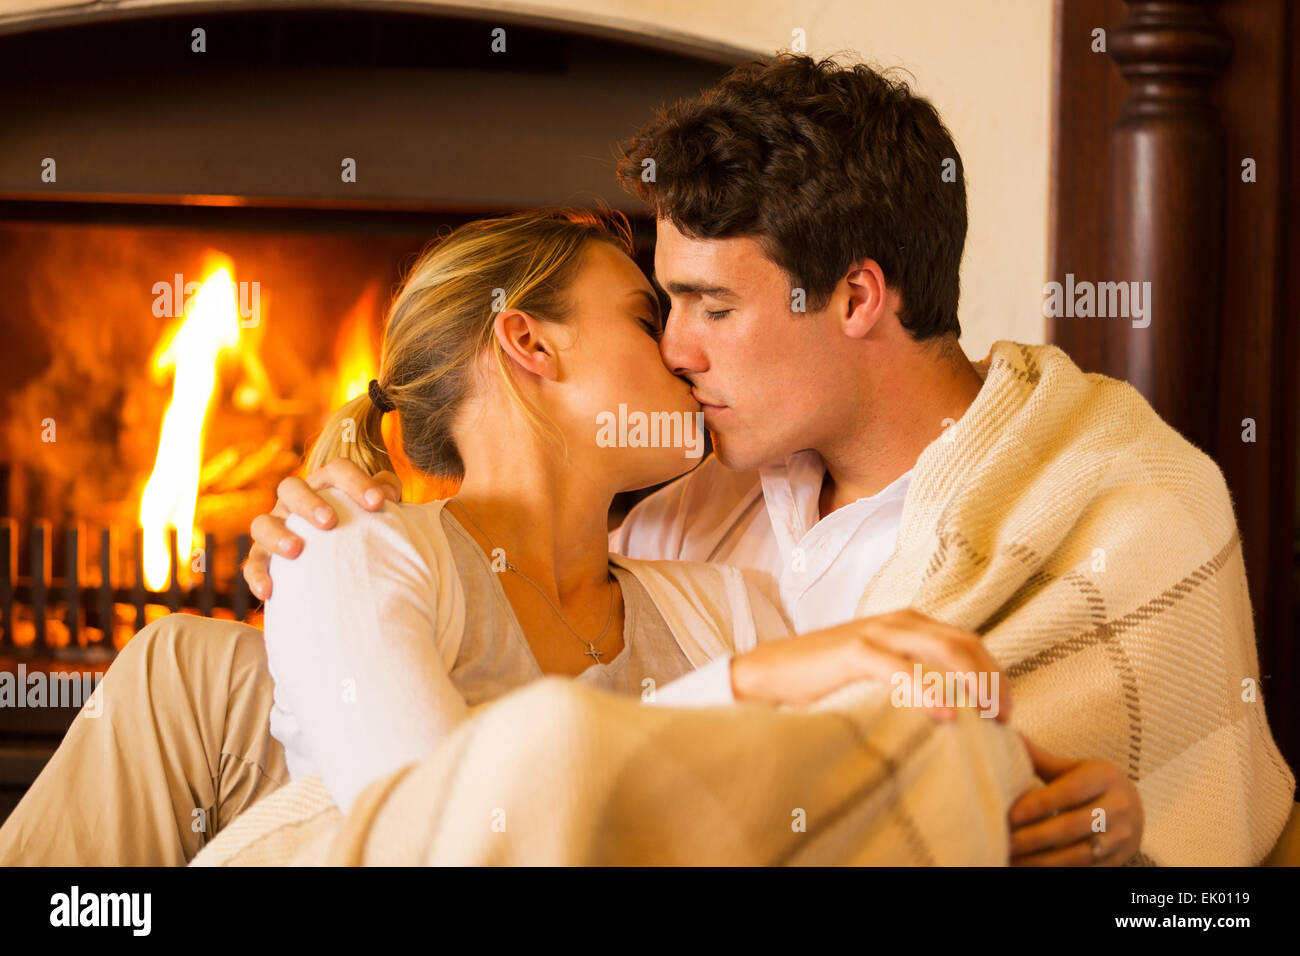 intimate young couple kissing at home in front of fireplace Stock Photo